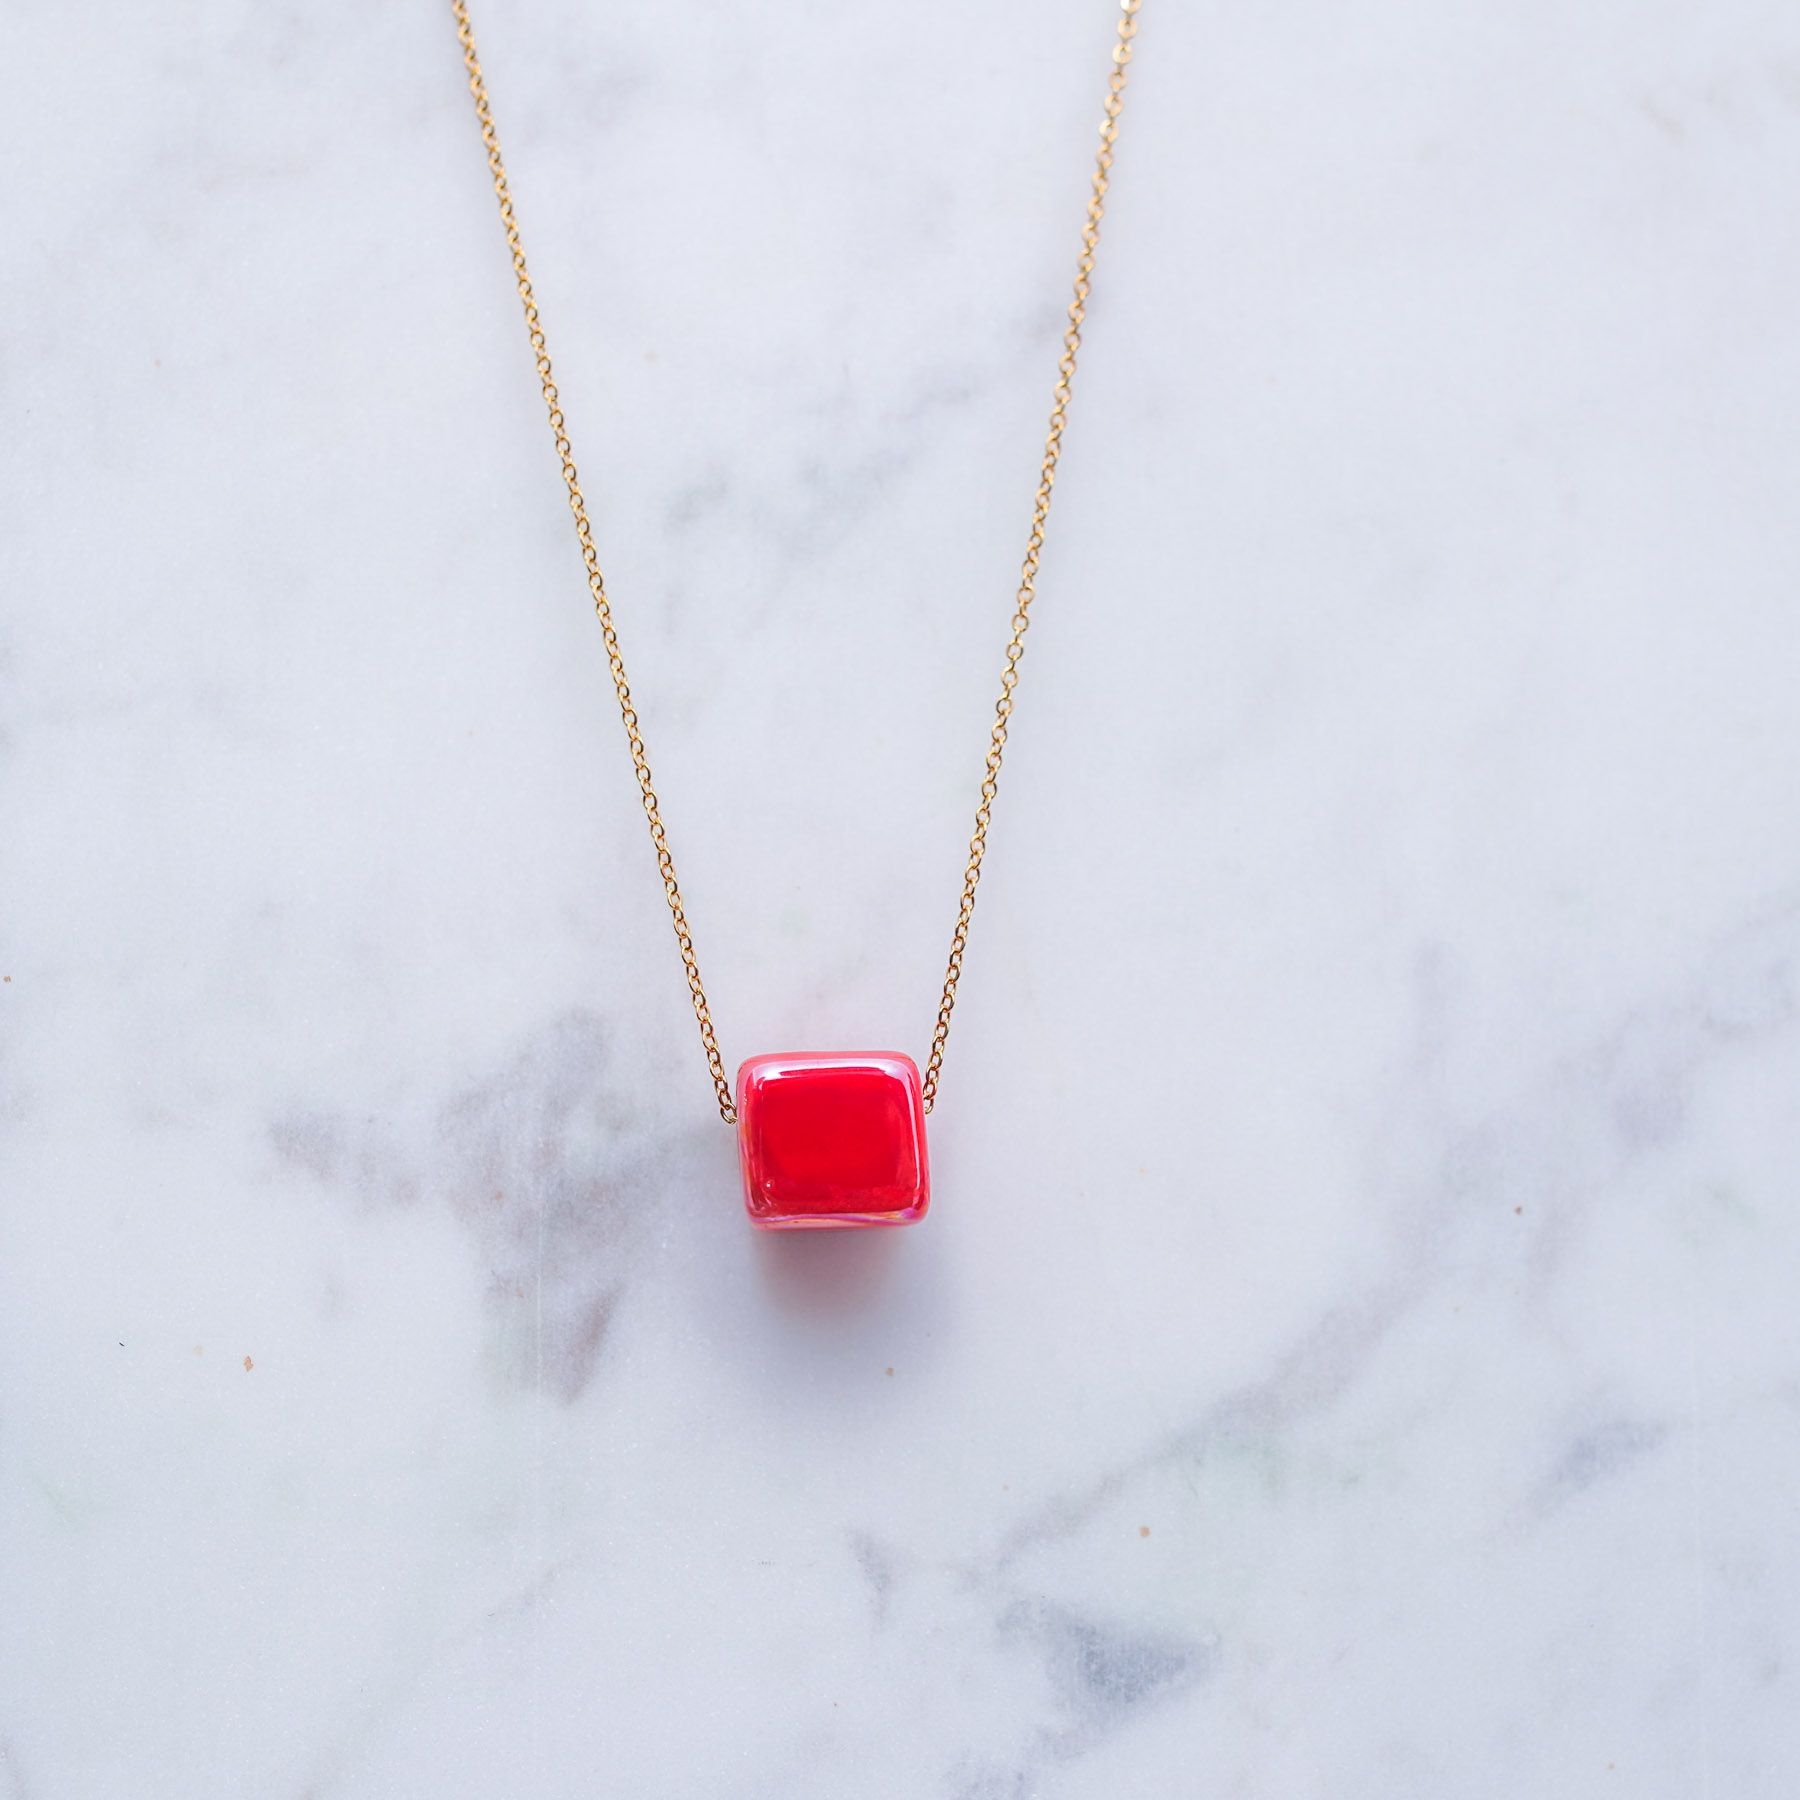 KIVOS NECKLACE - GOLD & PEARL RED ' - ' ΚΥΒΟΙ